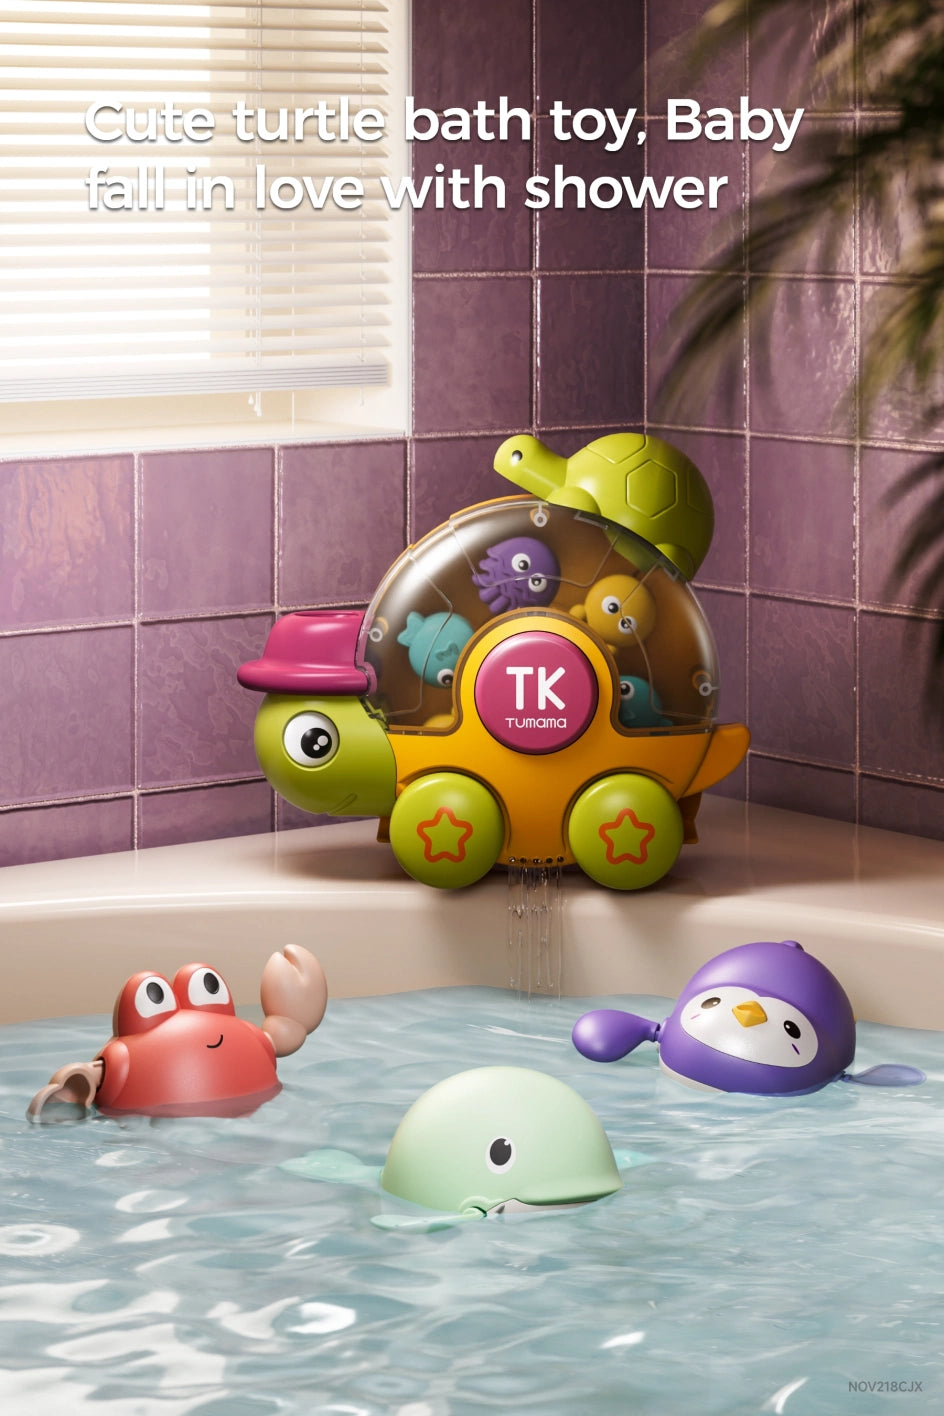 Bathtub fun water toy with turtle shower for toddlers